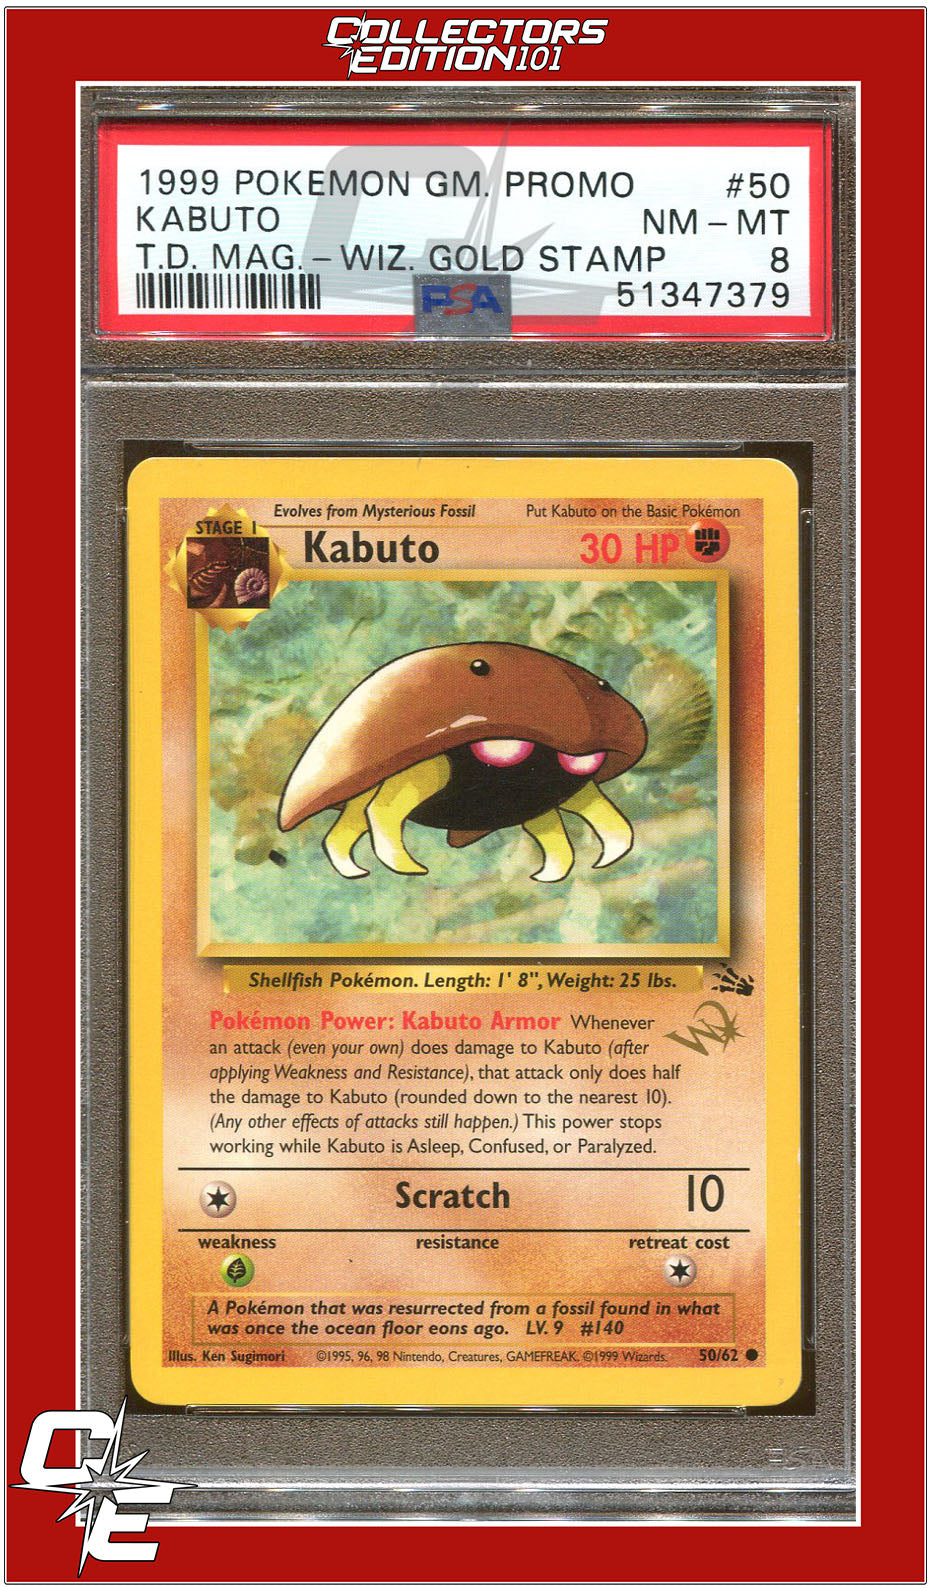 Fossil 50 Kabuto Wizards Gold Stamp PSA 8